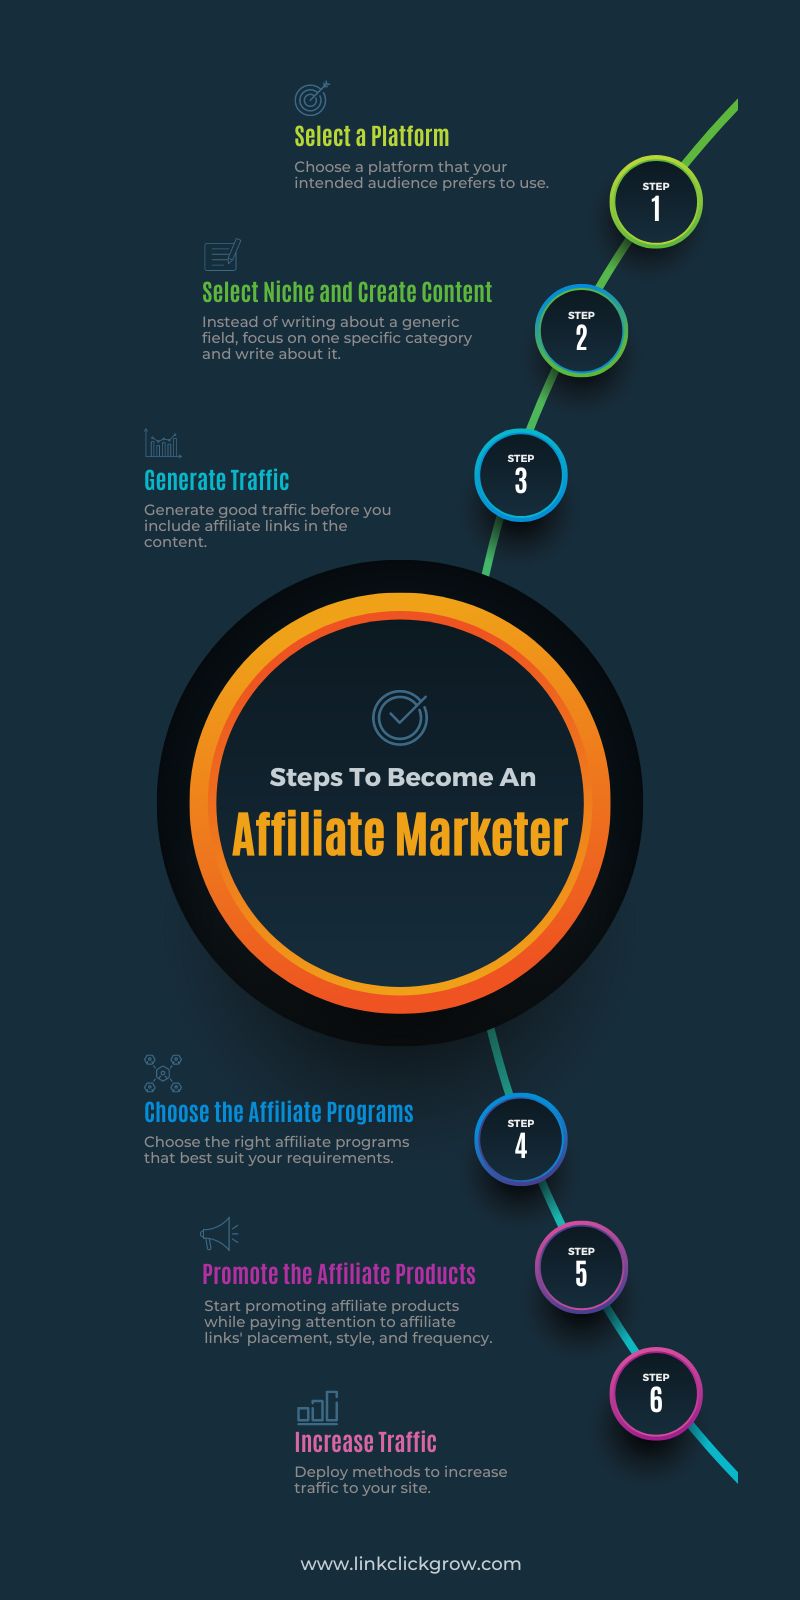 Steps to become an affiliate marketer